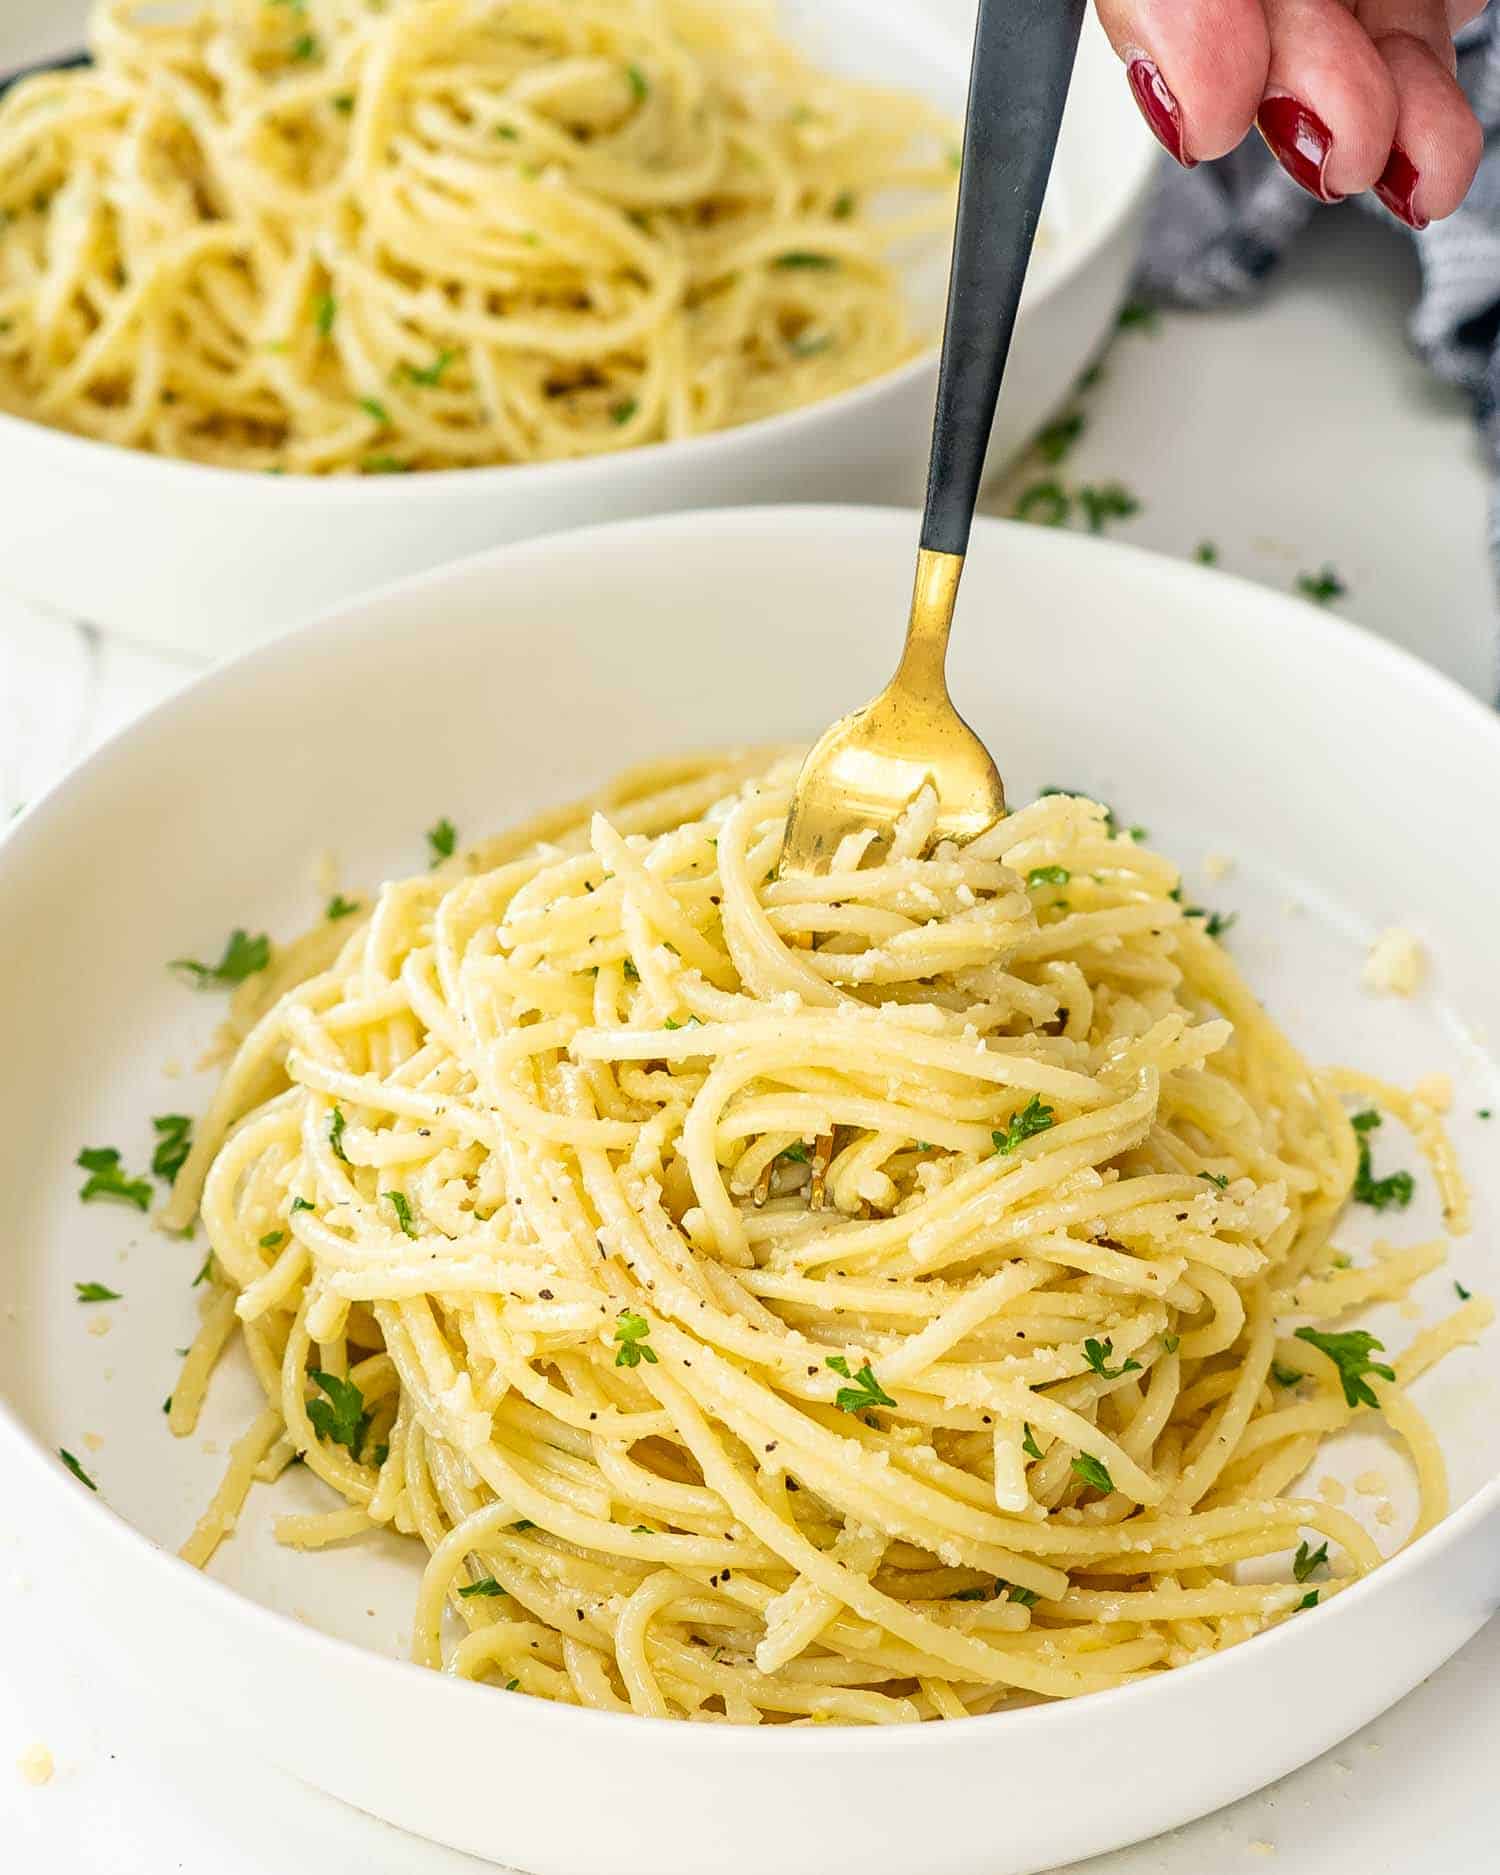 a serving of lemon pasta in a white bowl garnished with parsley and parmesan cheese.